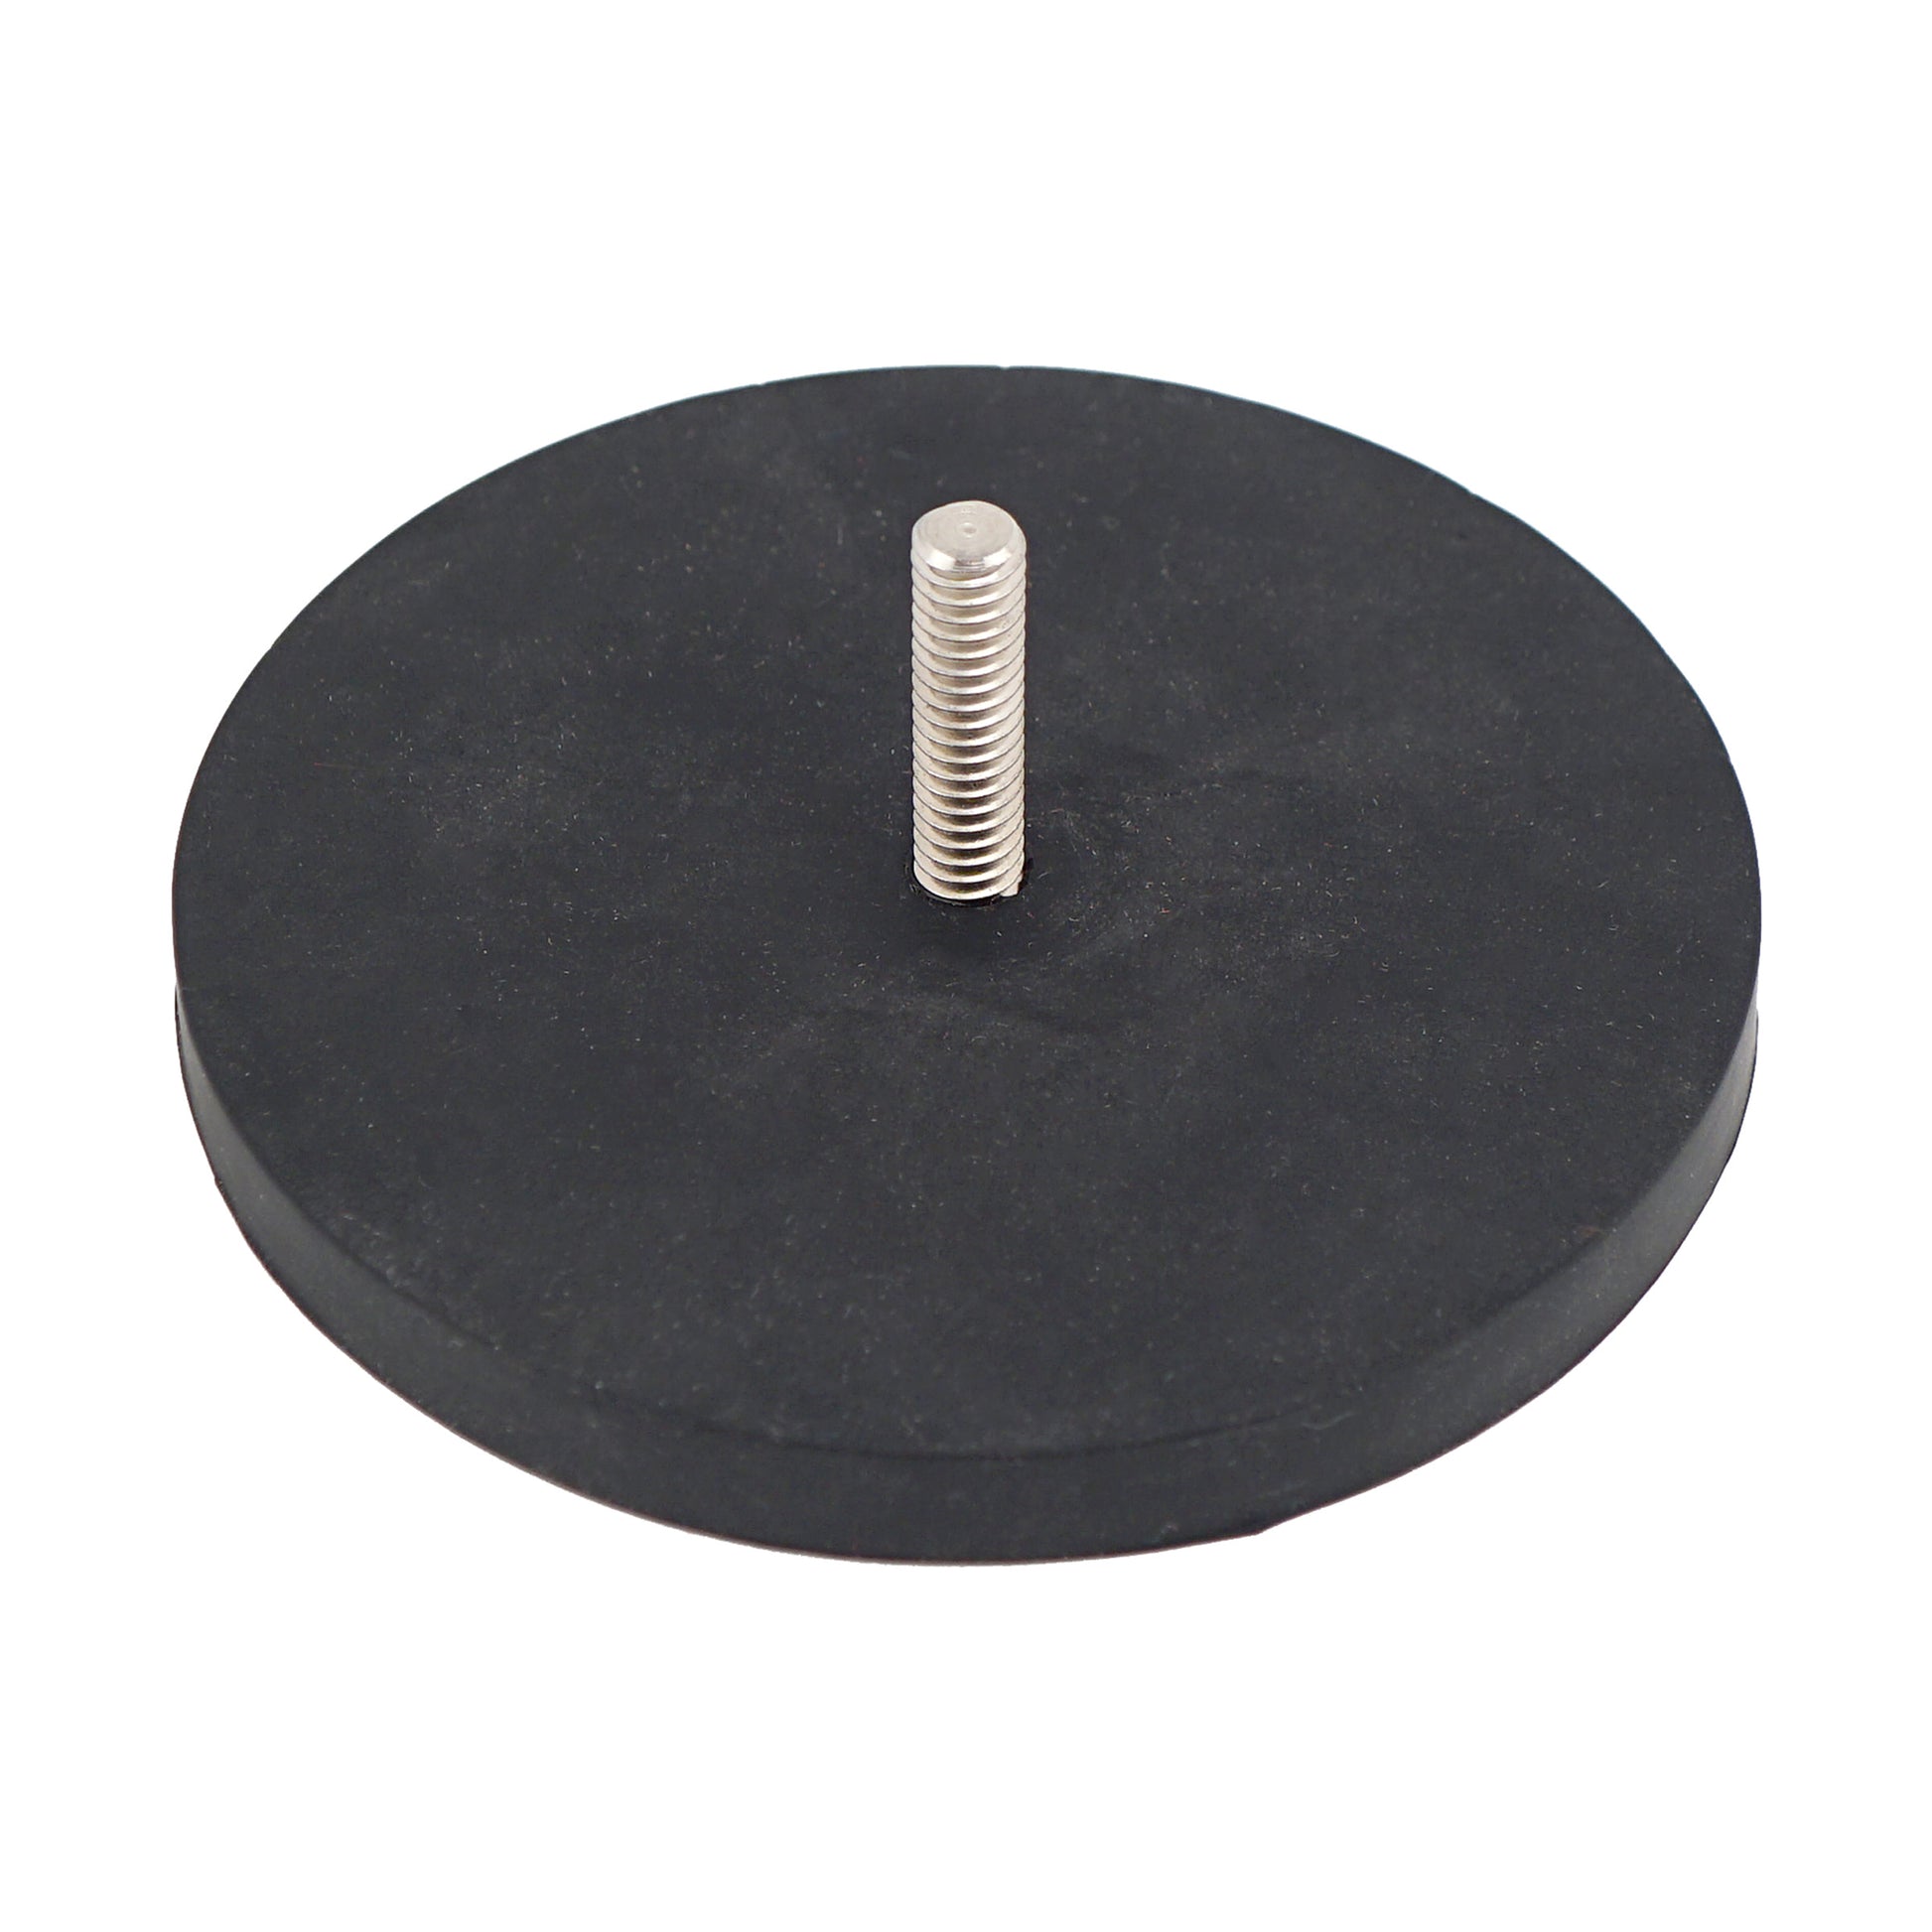 Load image into Gallery viewer, NADR351M Neodymium Rubber Coated Round Base Magnet with Male Thread - 45 Degree Angle View